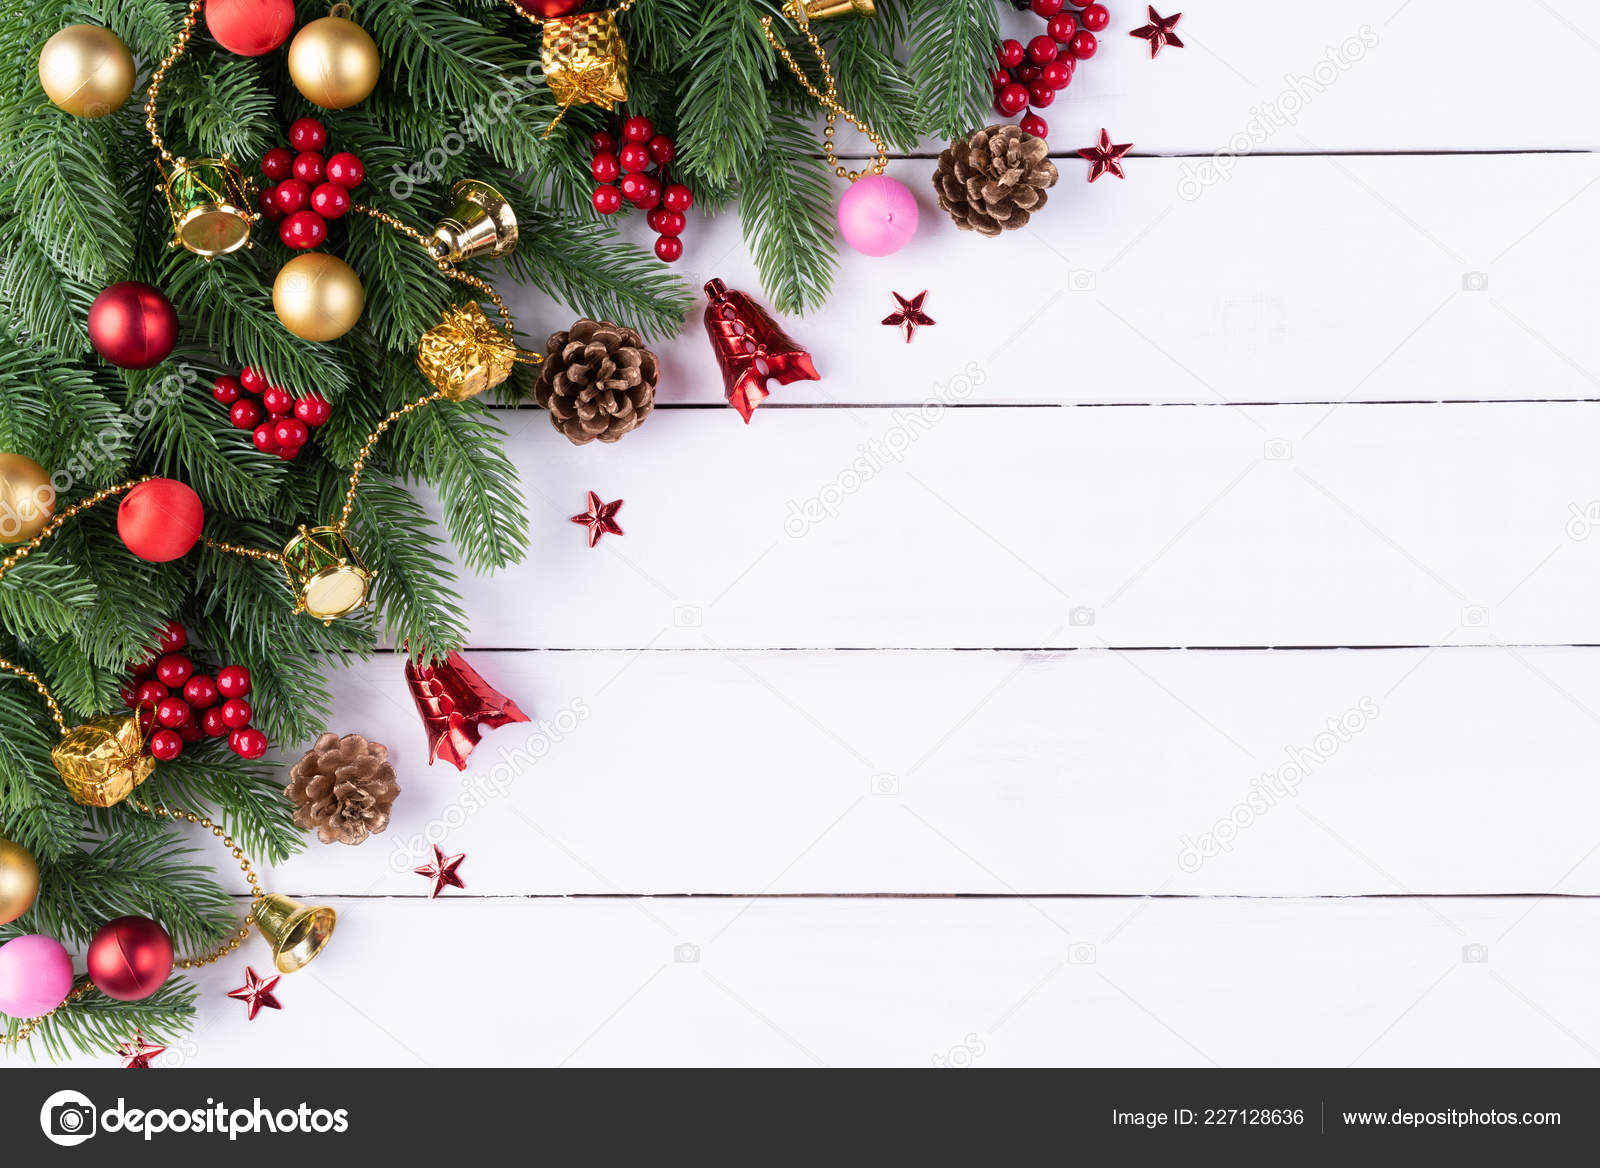 117591 Christmas Background Photos and Premium High Res Pictures  Getty  Images